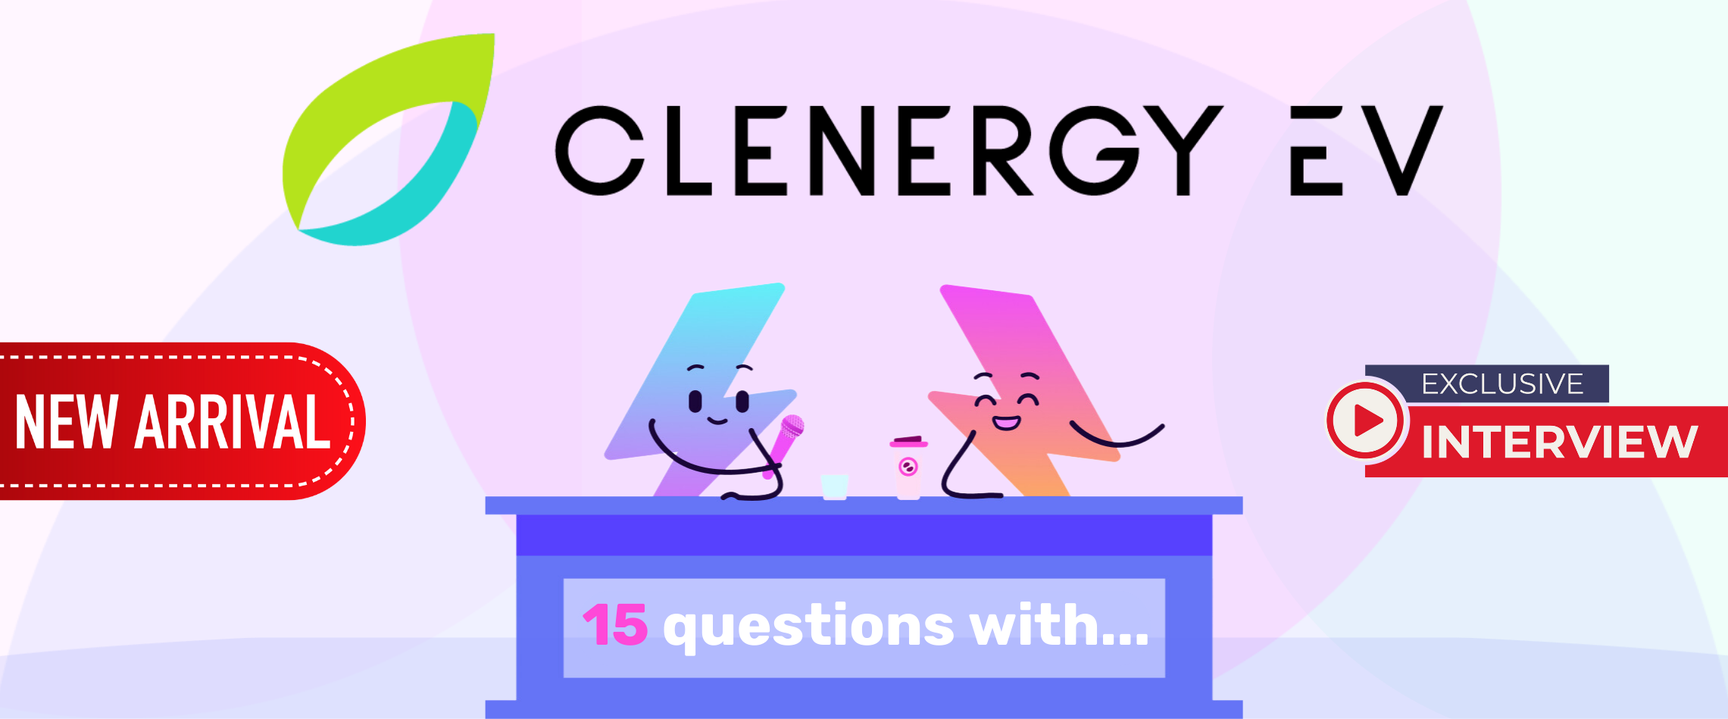 Octopus Electroverse mascot, Zapman, interviews another Zapman about the Clenergy integration